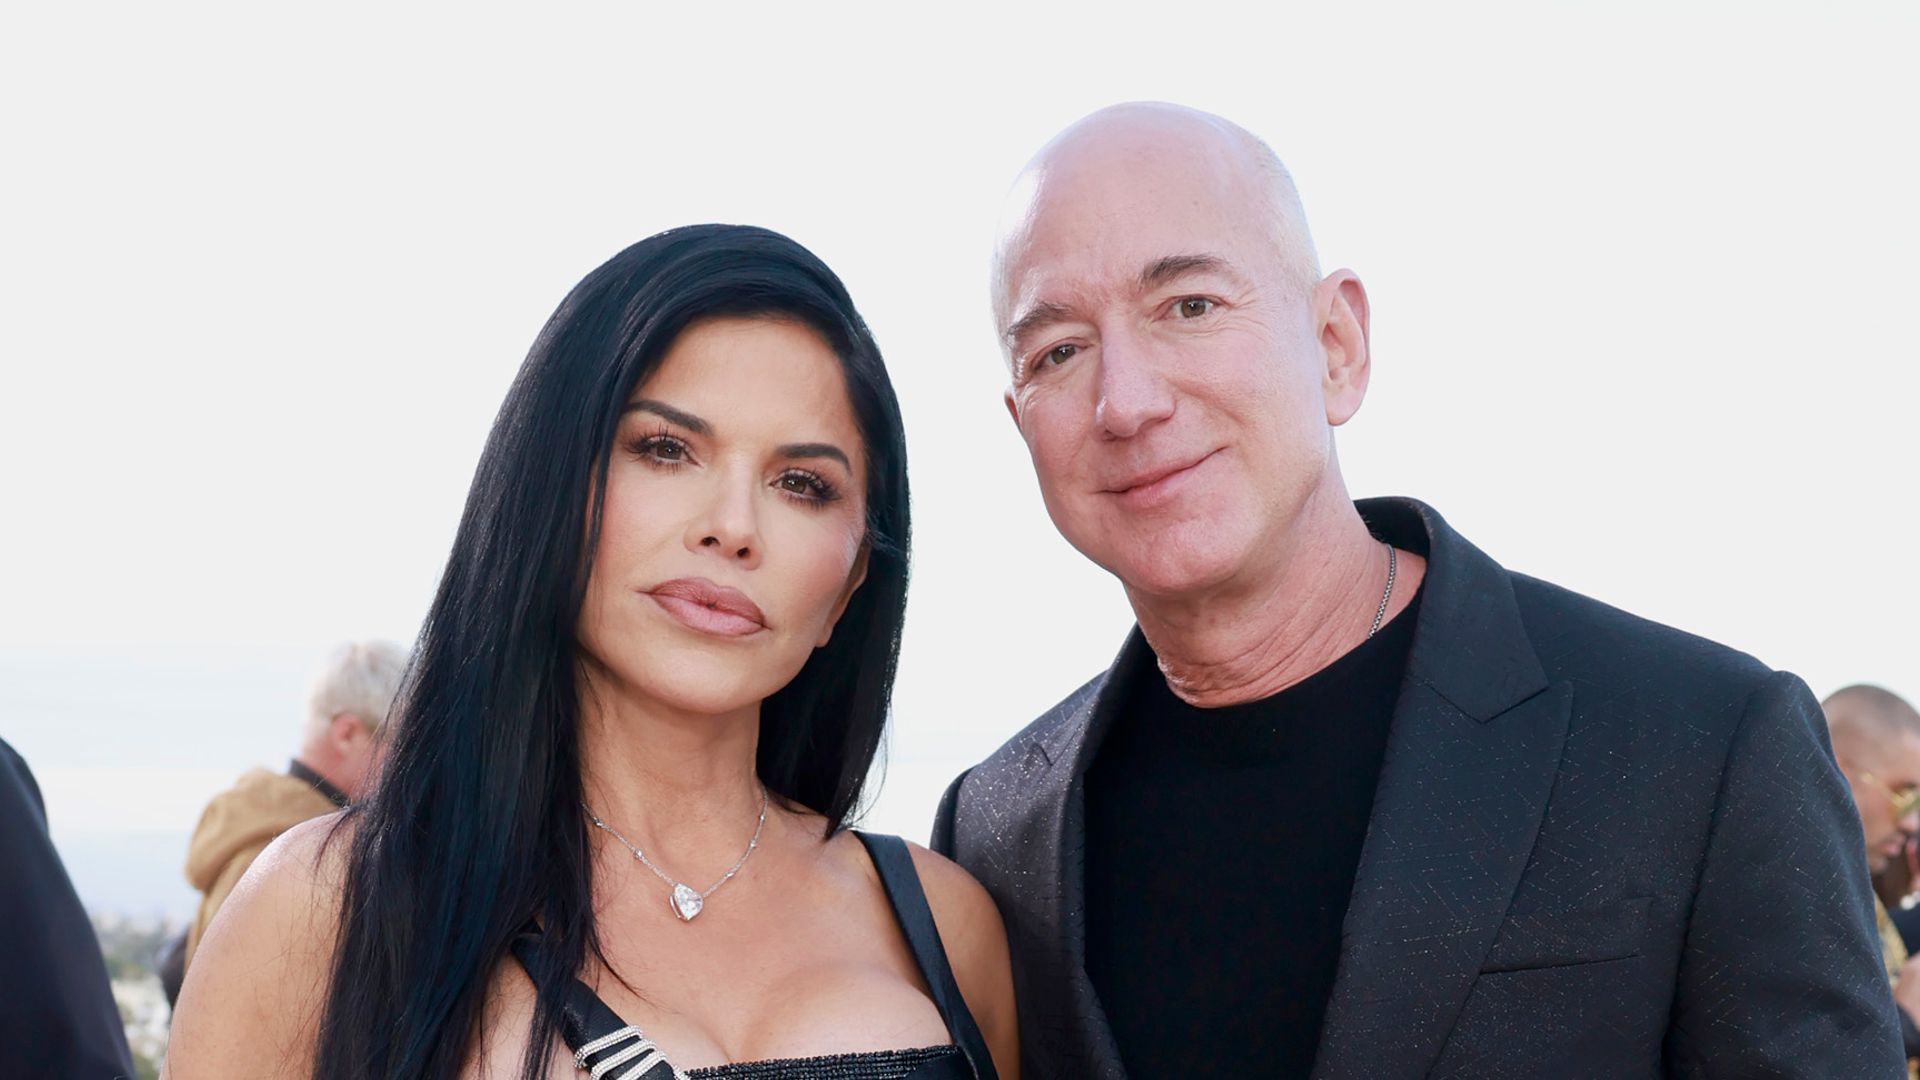 Lauren Sanchez gets real about her struggle after vacation with Jeff Bezos and family